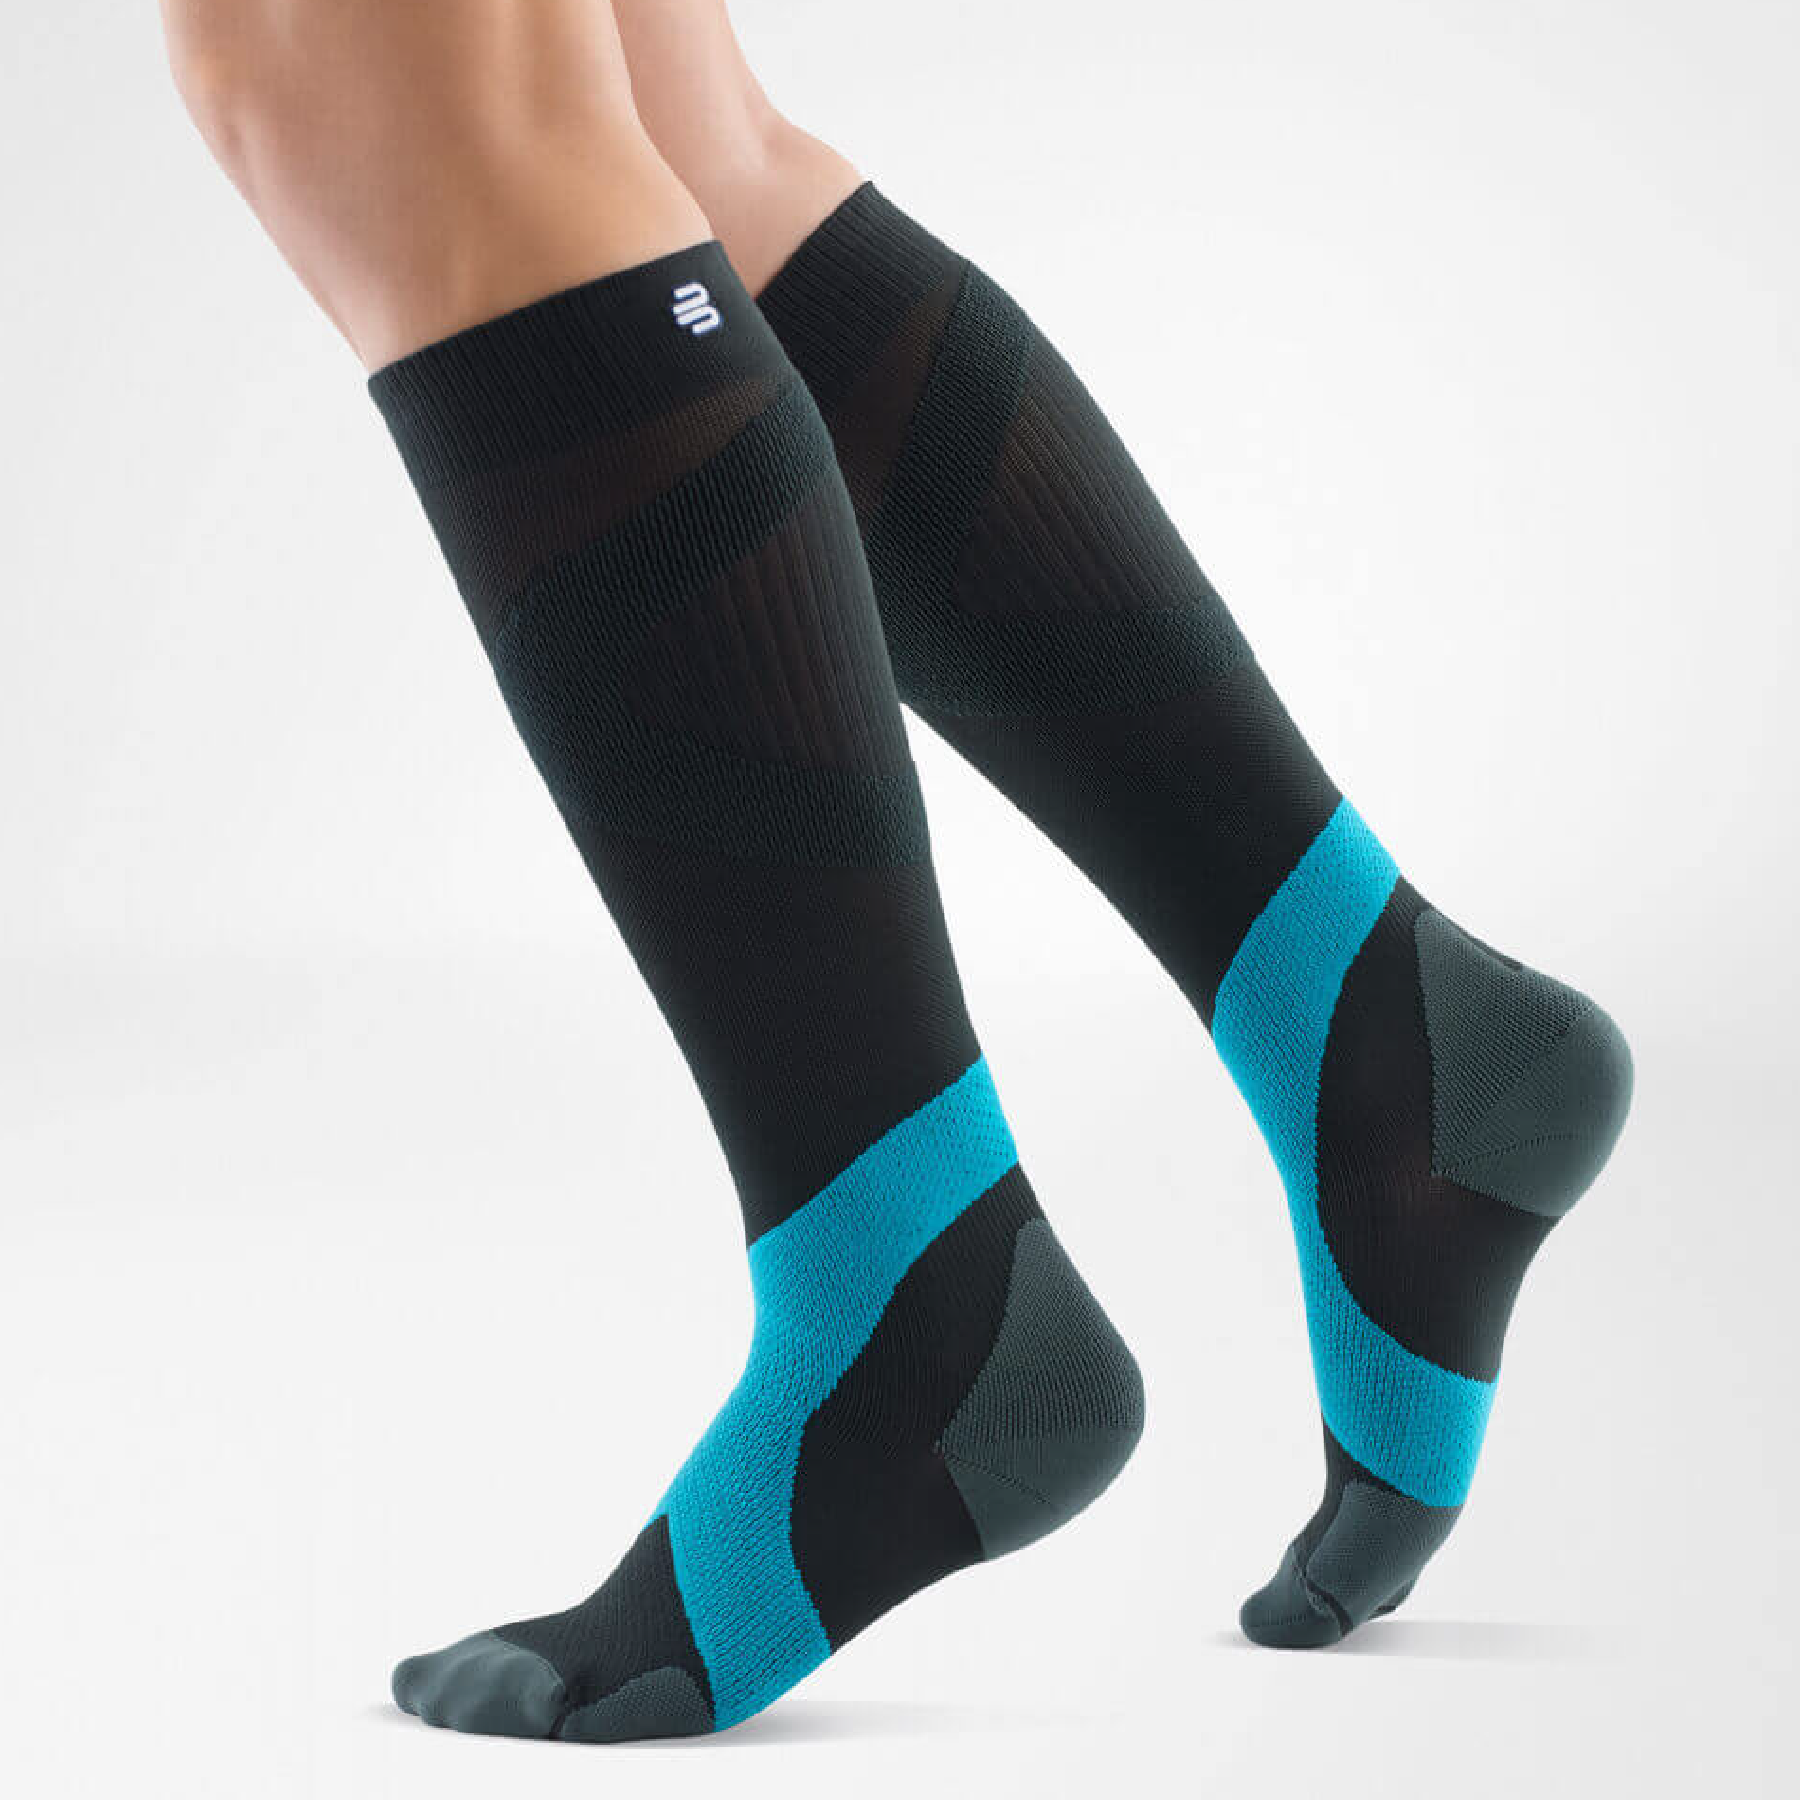 Buy Wagner Active Compression Socks Small/Medium Online at Chemist